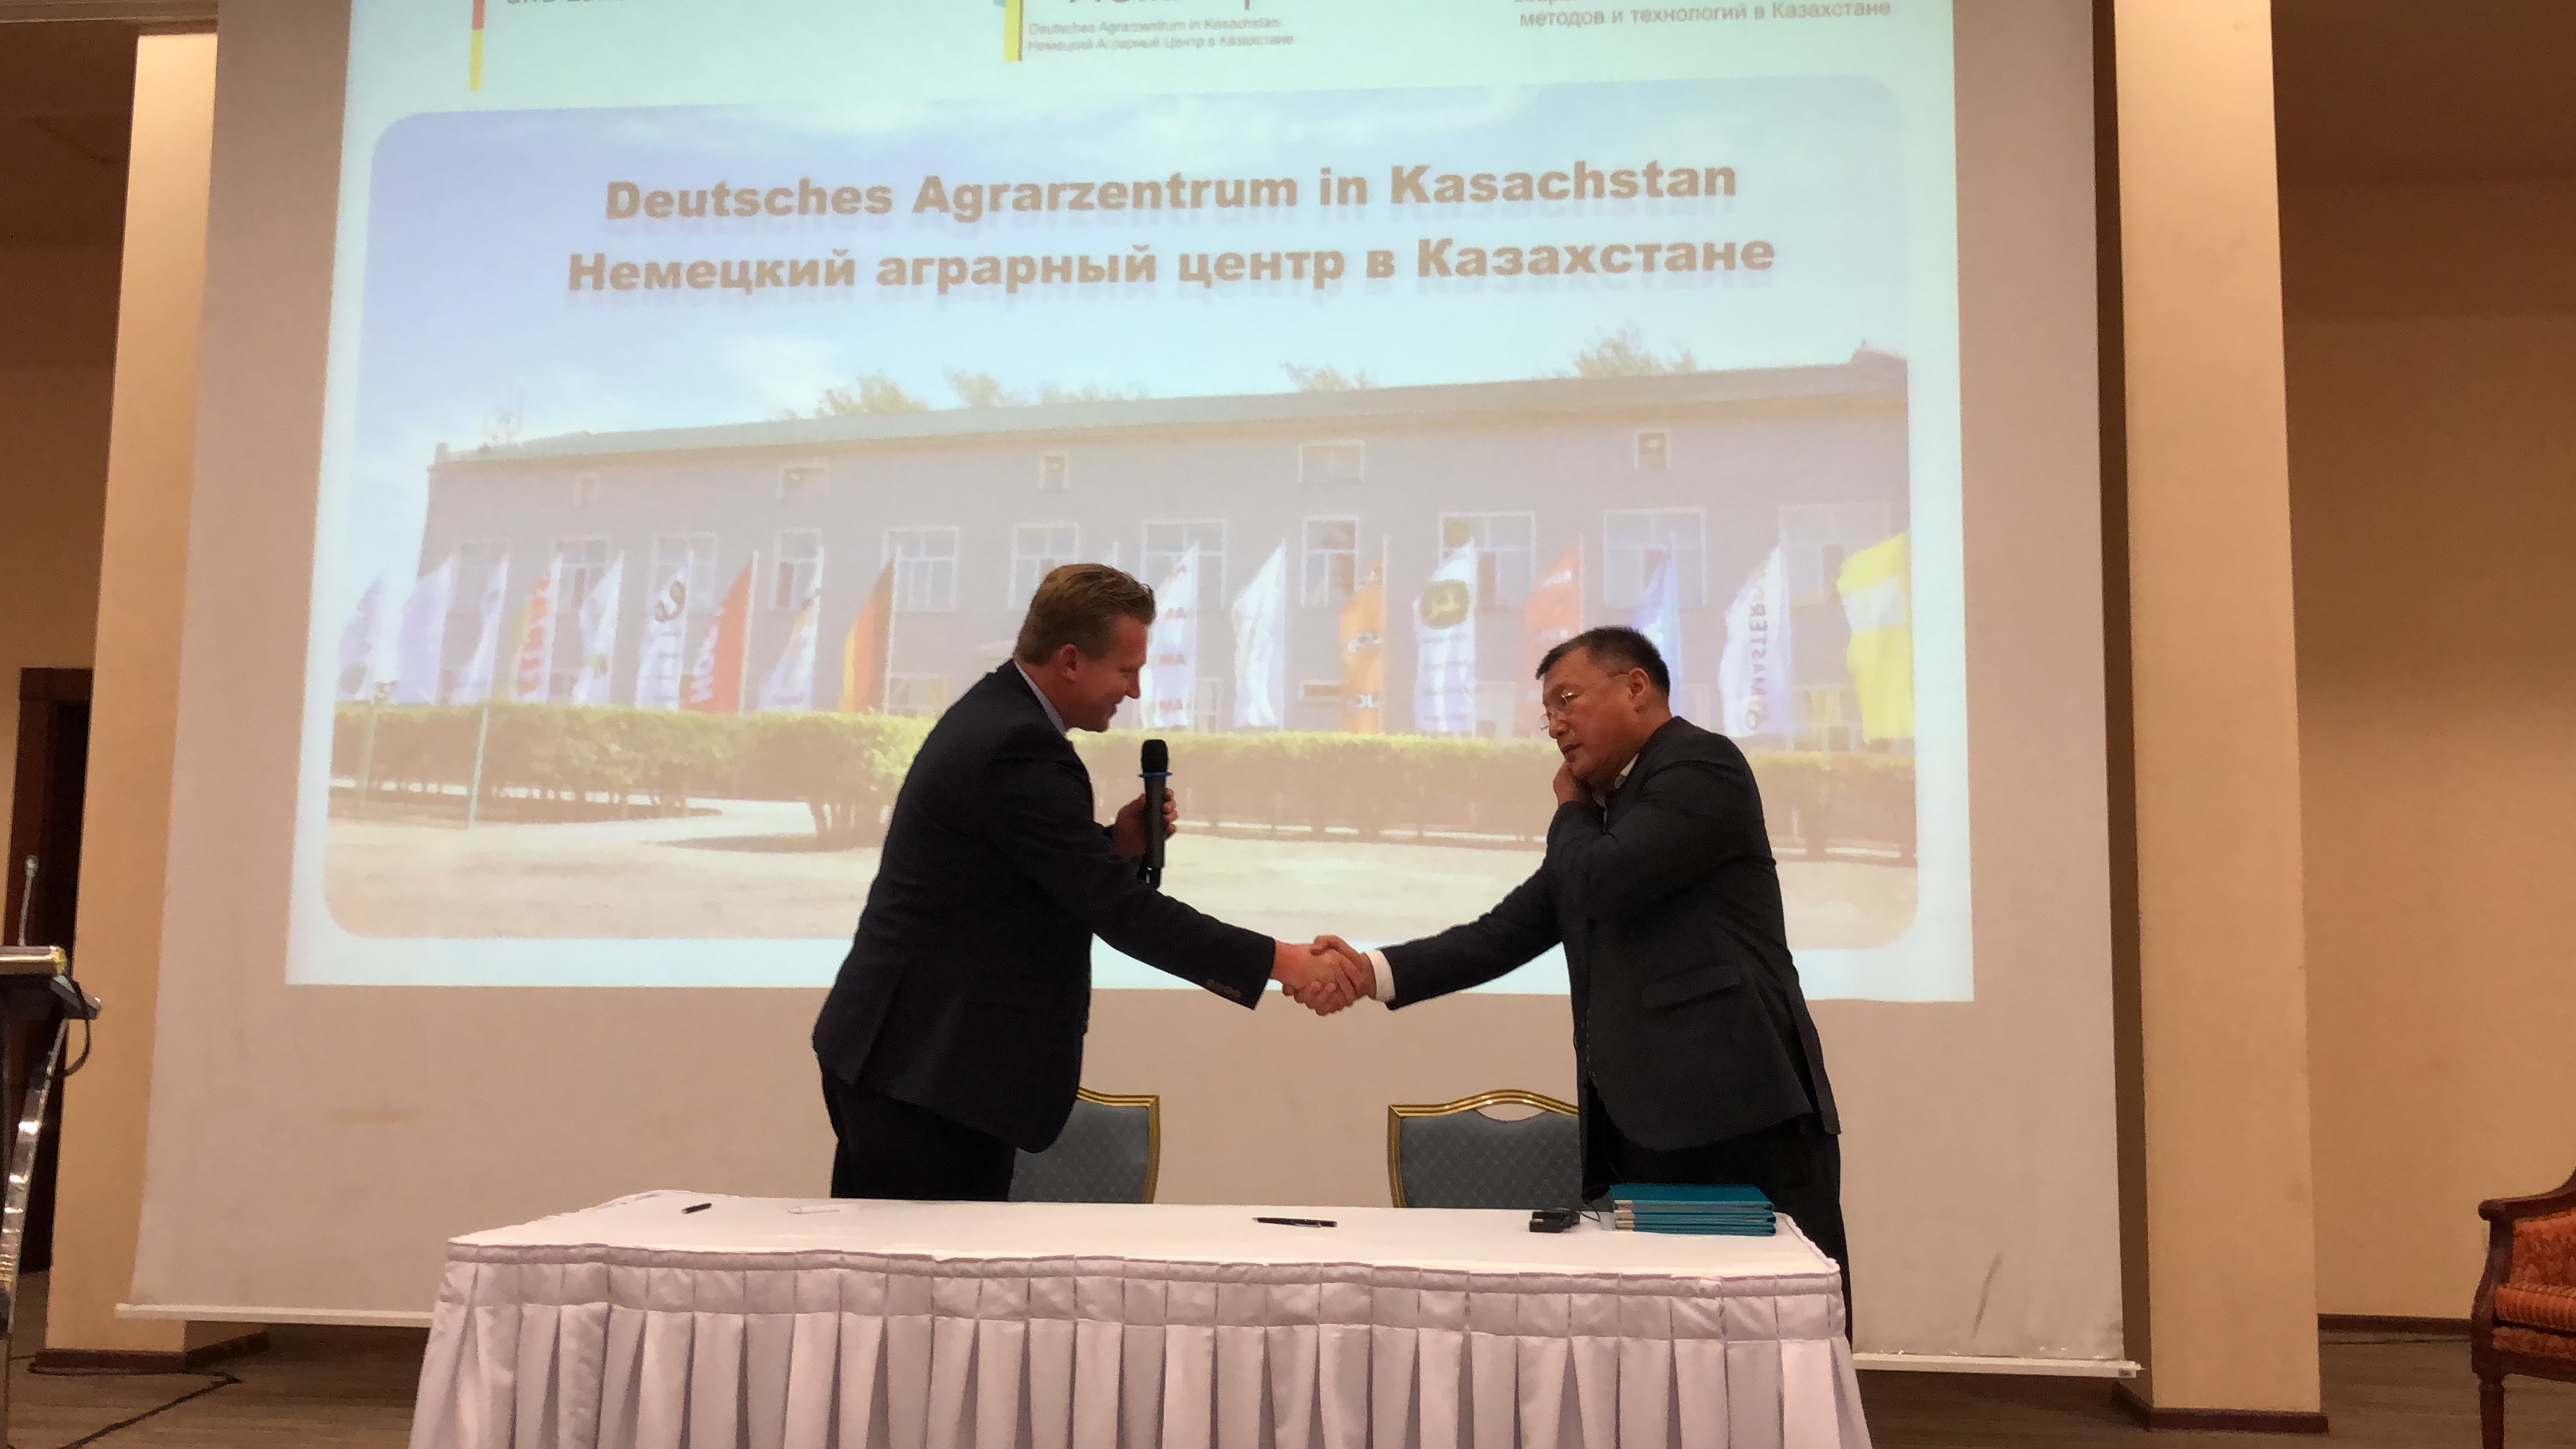 The German agricultural center has summed up the results of its project in Kazakhstan